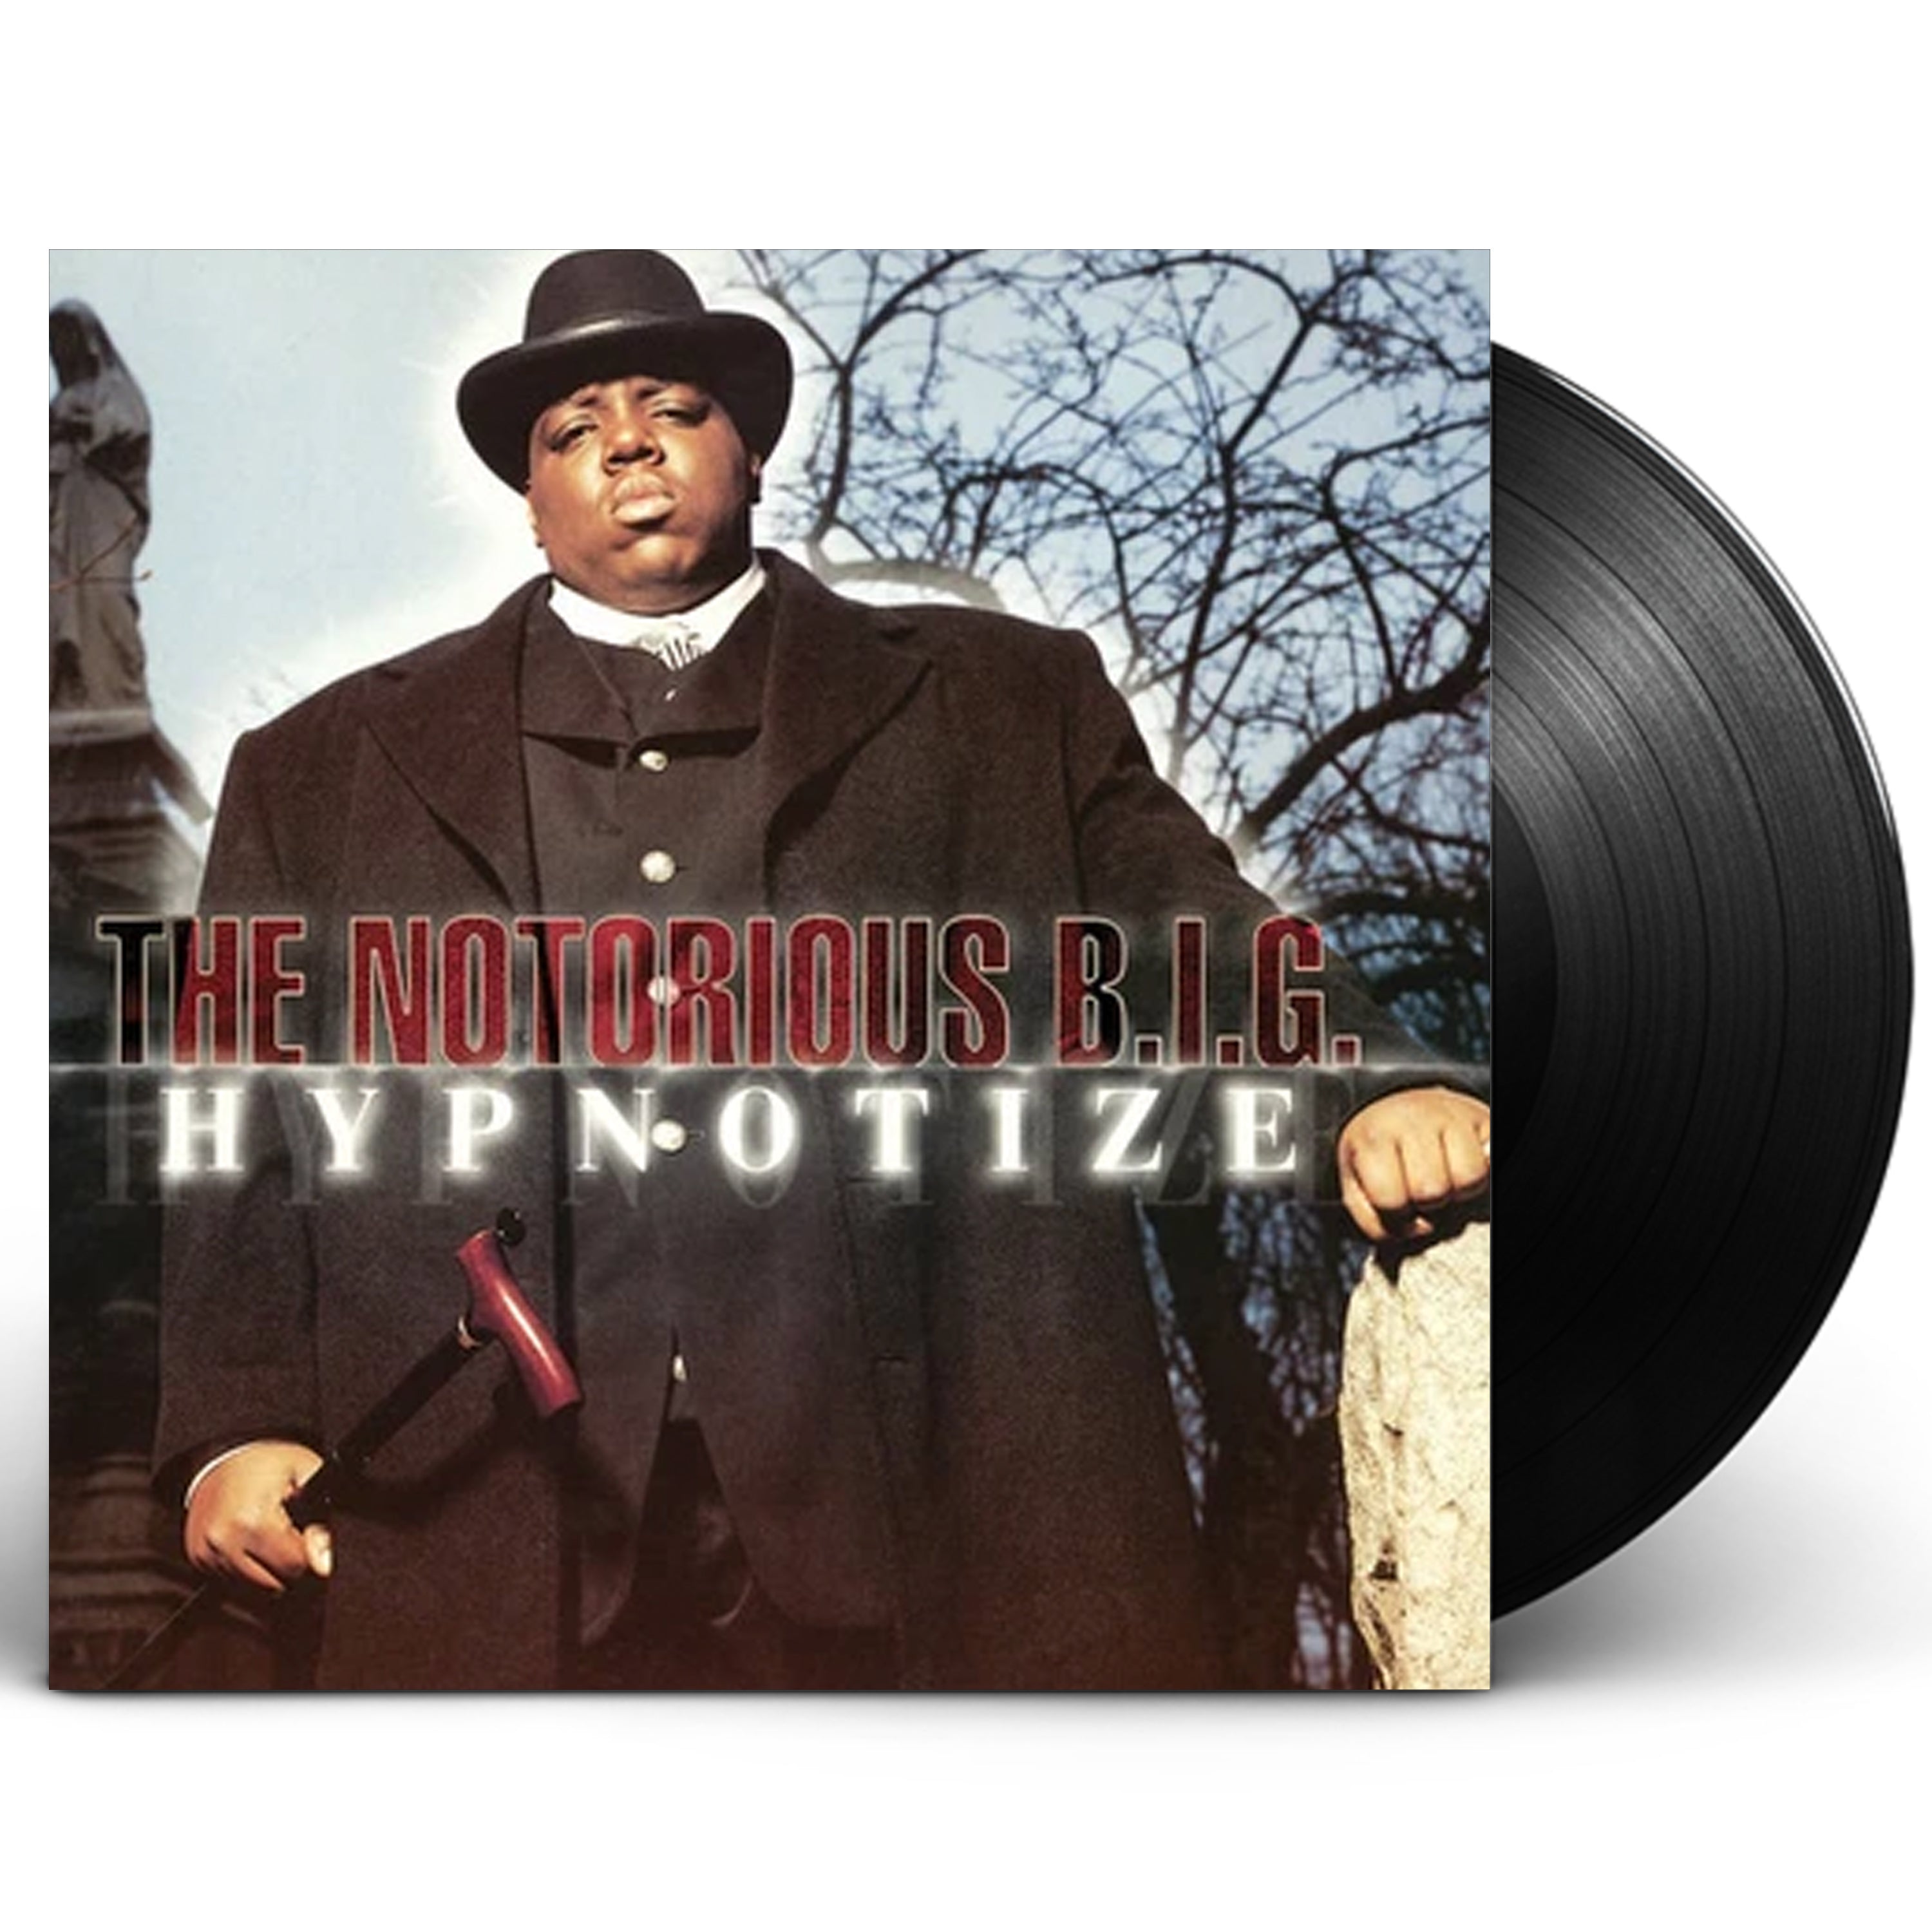 Hypnotize (The Notorious B.I.G. song) - Wikipedia